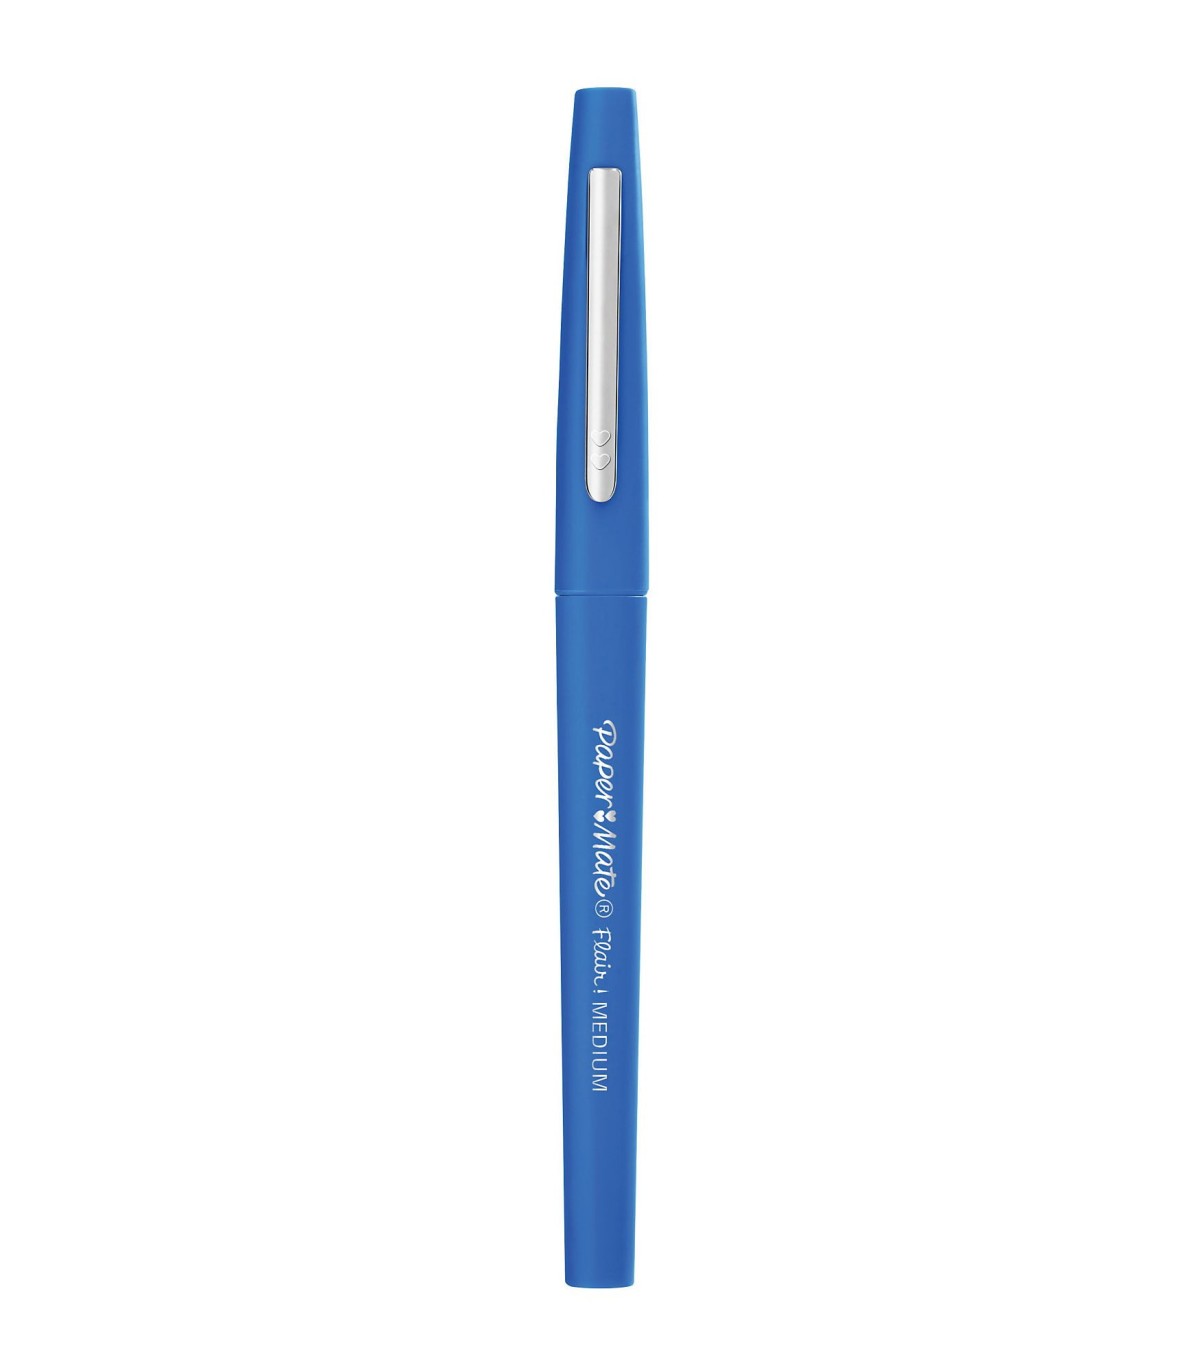 Stylo feutre Flair Original - Turquoise PAPERMATE S0971640